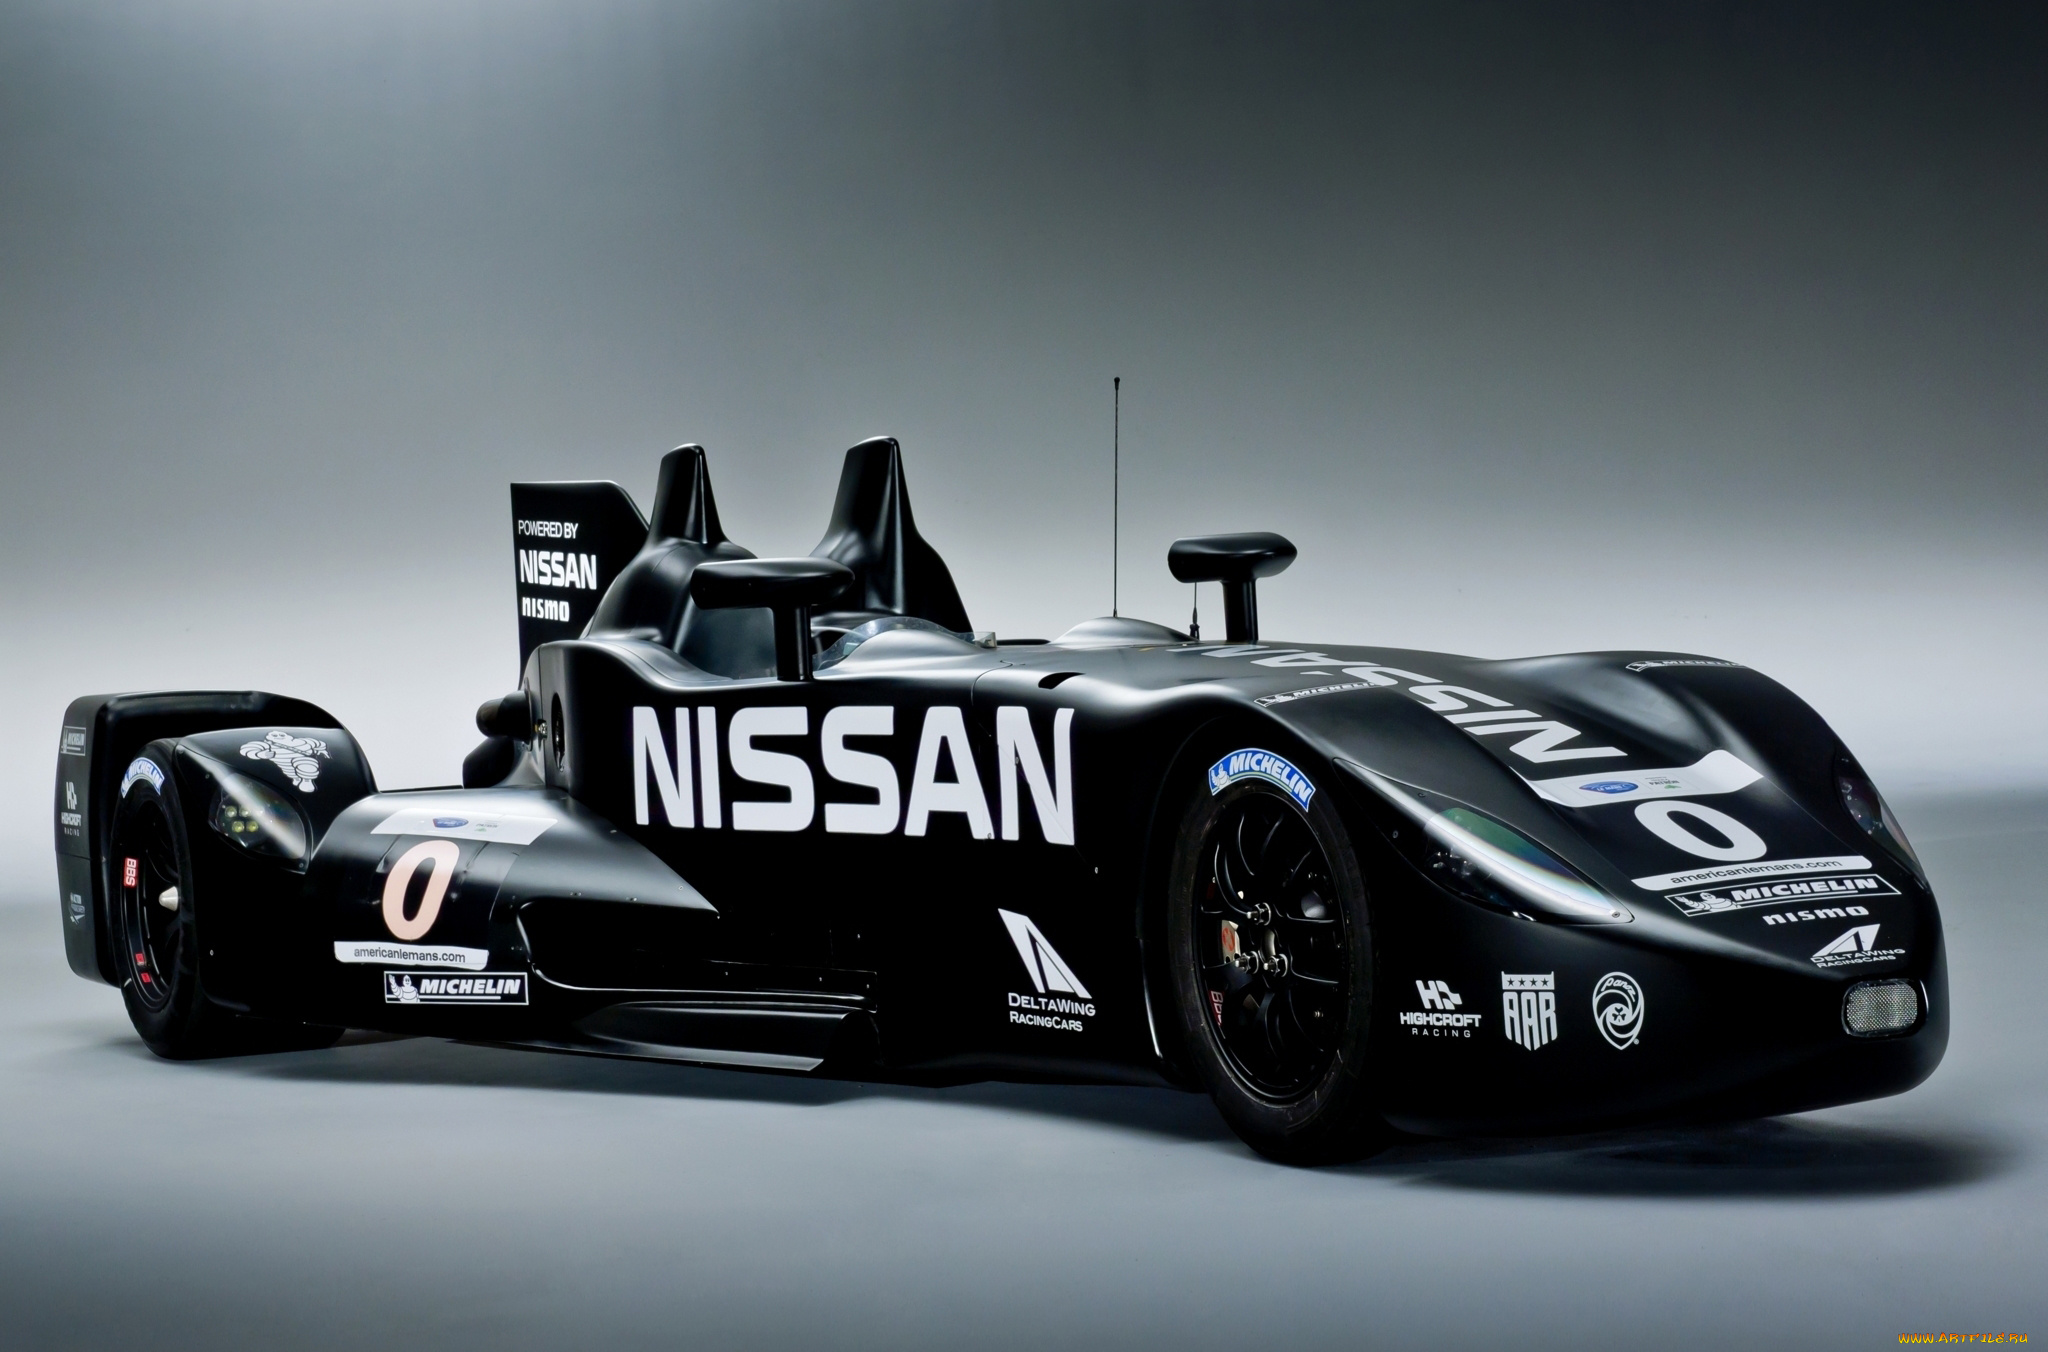 nissan, deltawing, experimental, race, car, 2012, автомобили, nissan, datsun, 2012, car, race, experimental, deltawing